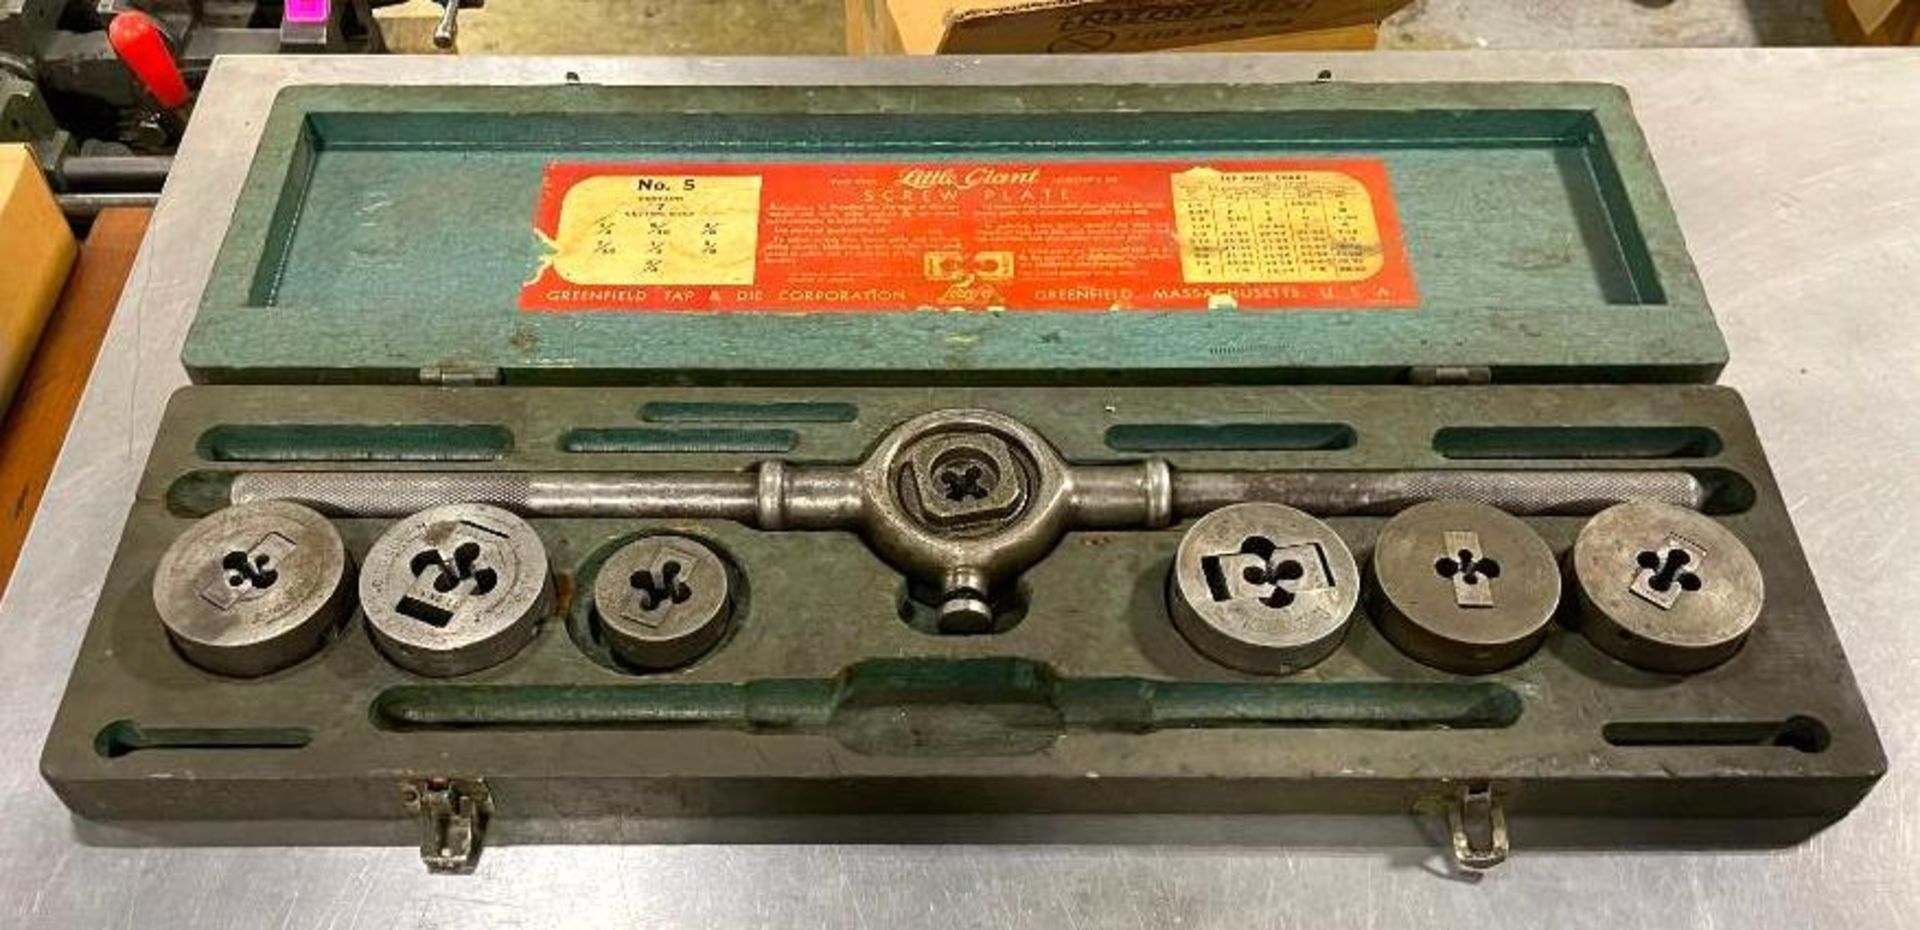 GREENFIELD LITTLE GIANT NO. 5 TAP AND DIE SET LOCATION: WAREHOUSE QTY: 1